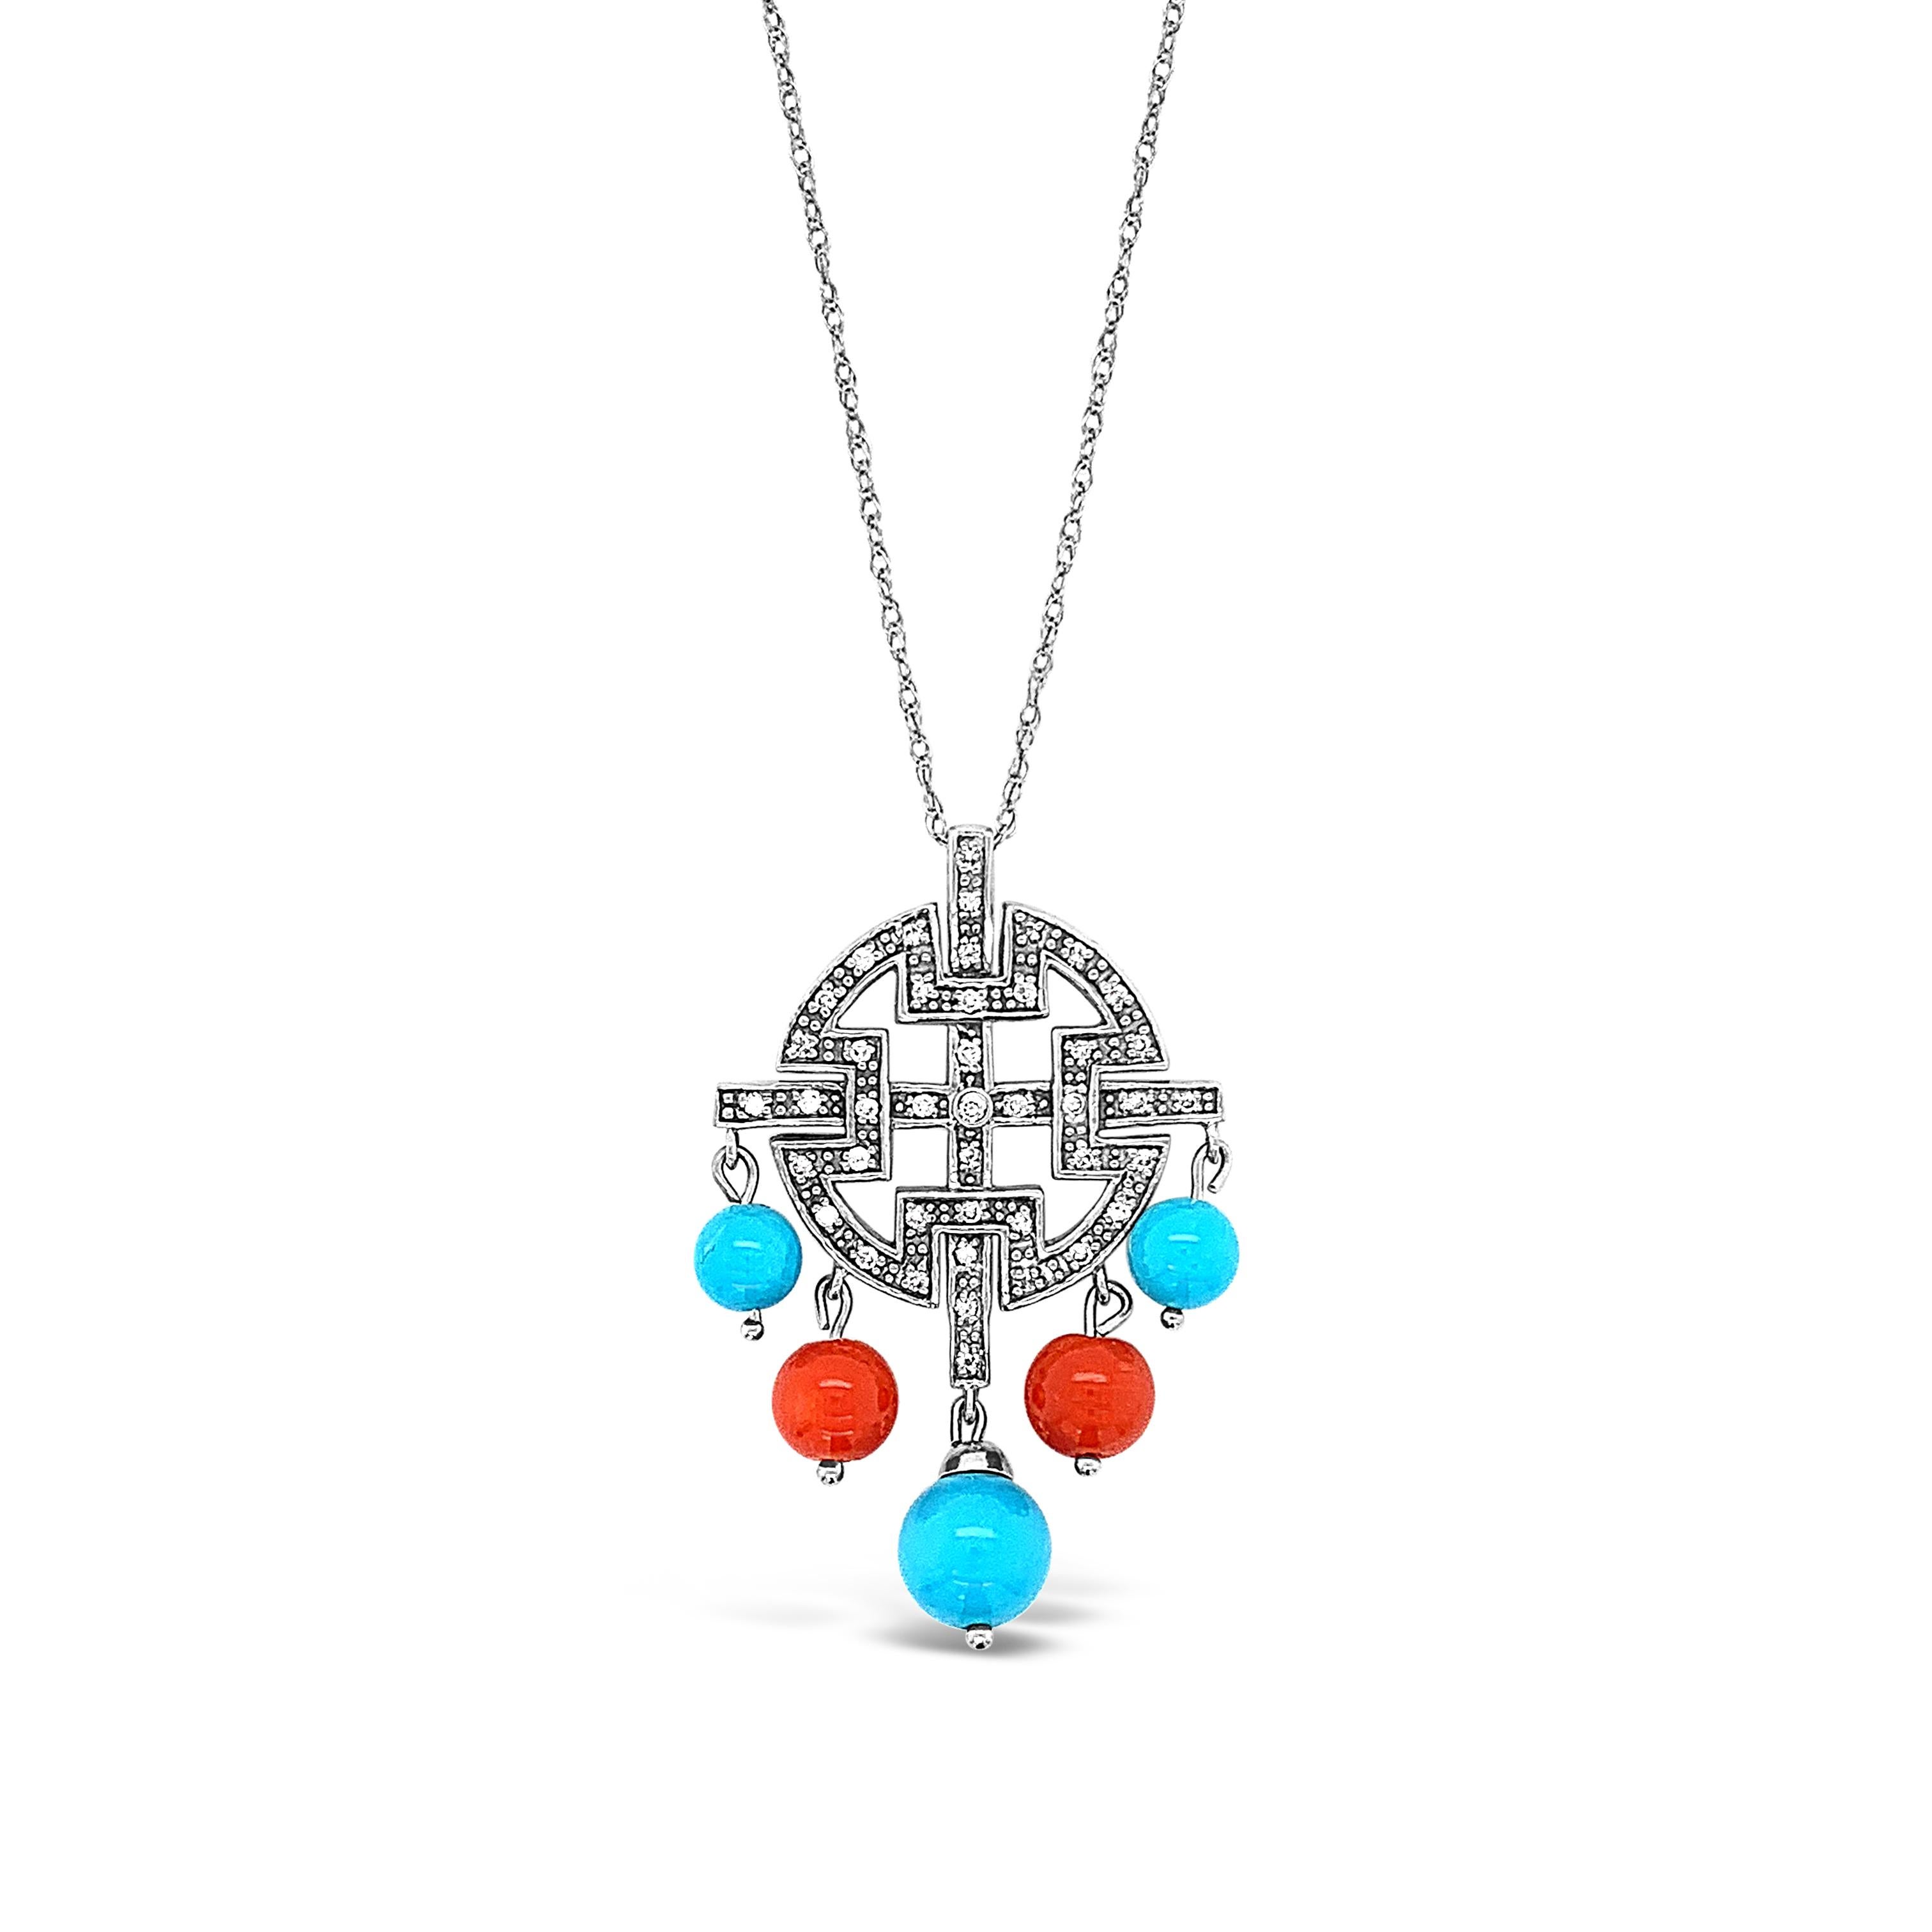 Grand Sample Sale Pendant featuring 4 cts. Robins Egg Blue Turquoise™, 3 1/2 cts. Coral, 1/4 cts. Vanilla Diamonds® set in 14K Vanilla Gold®. Please feel free to reach out with any questions! Item comes with a Le Vian Grand Sample Sale™ jewelry box